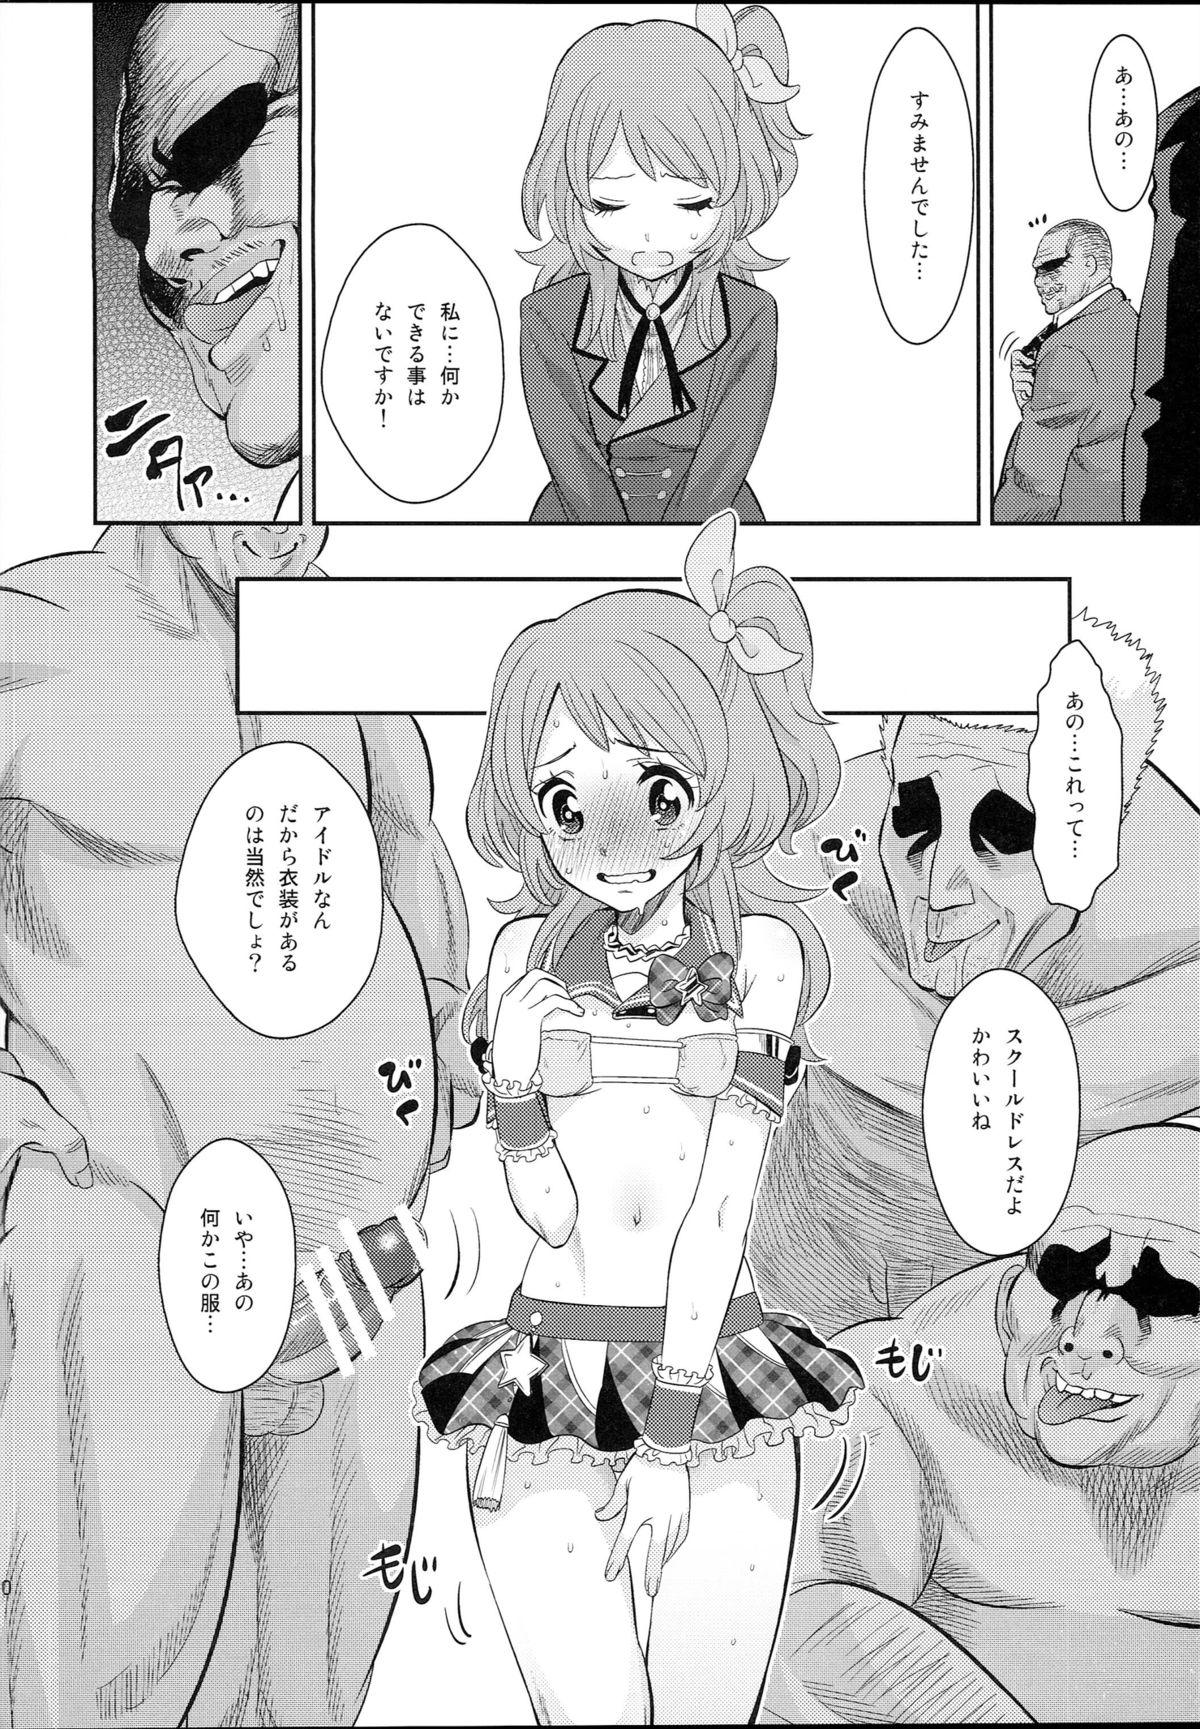 First Time IT WAS A good EXPERiENCE - Aikatsu Cruising - Page 10